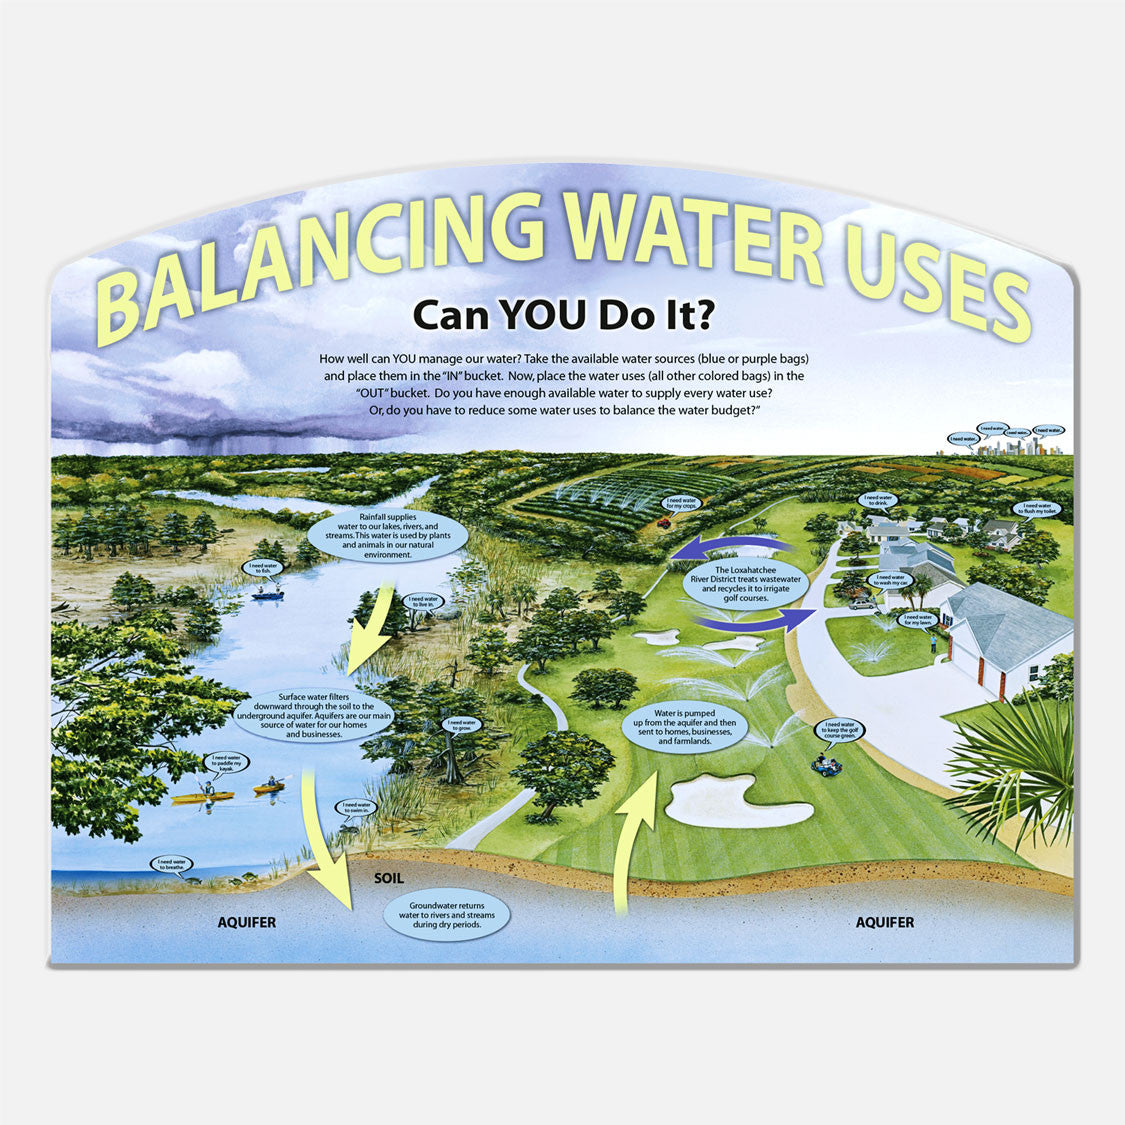 This educational display about water use and conservation in Florida is beautifully illustrated and accurate in detail.